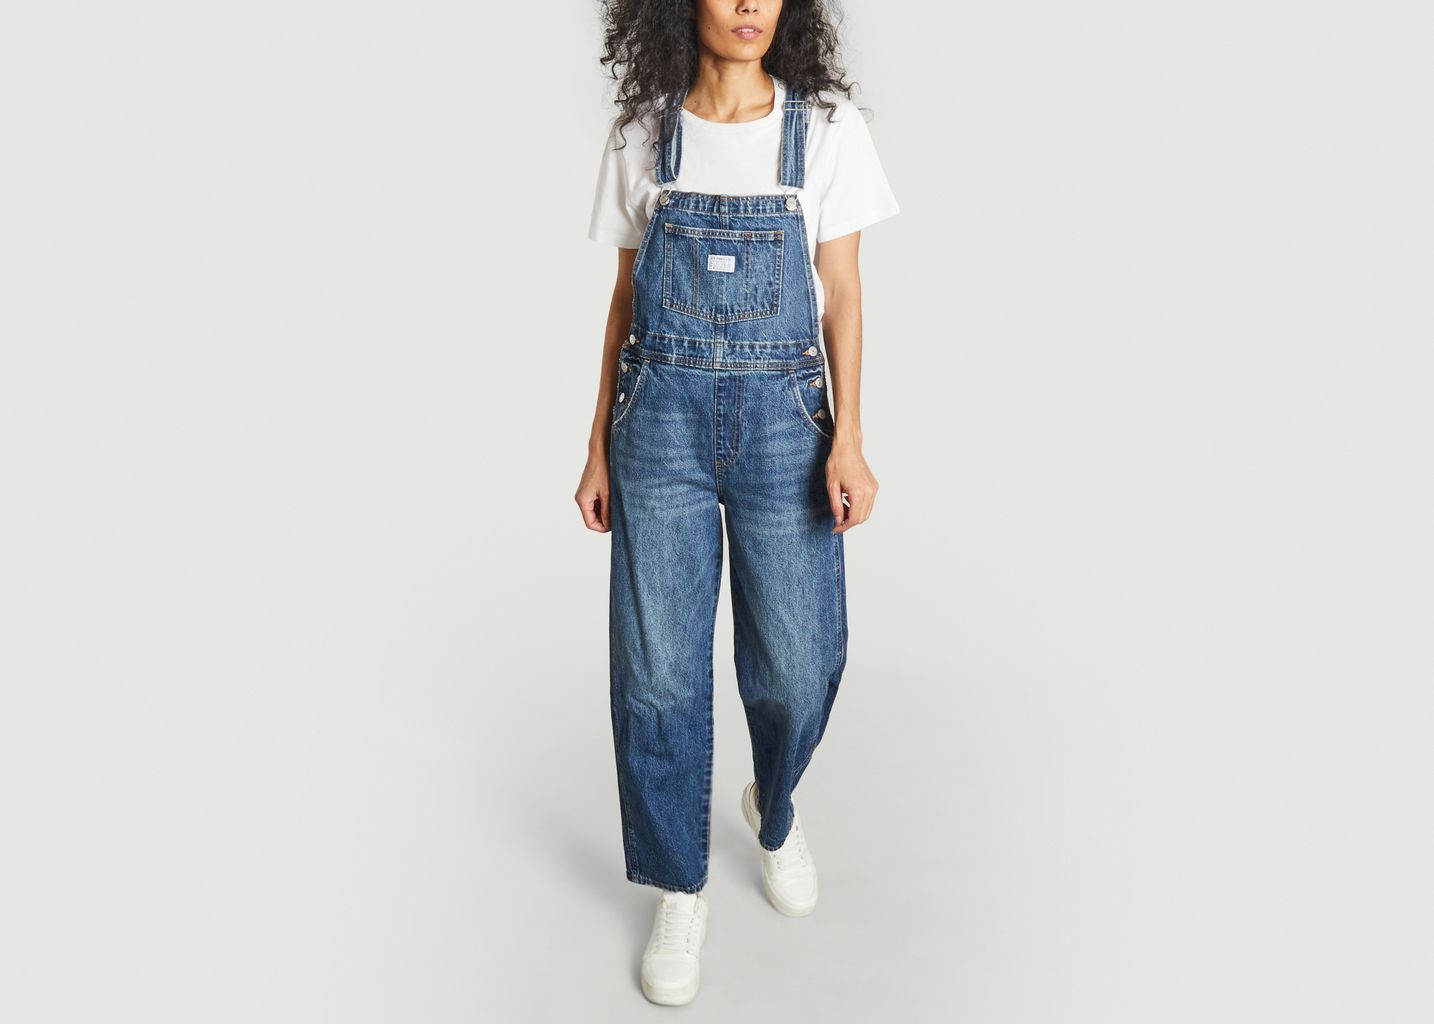 Vintage Overall  - Levi's Red Tab